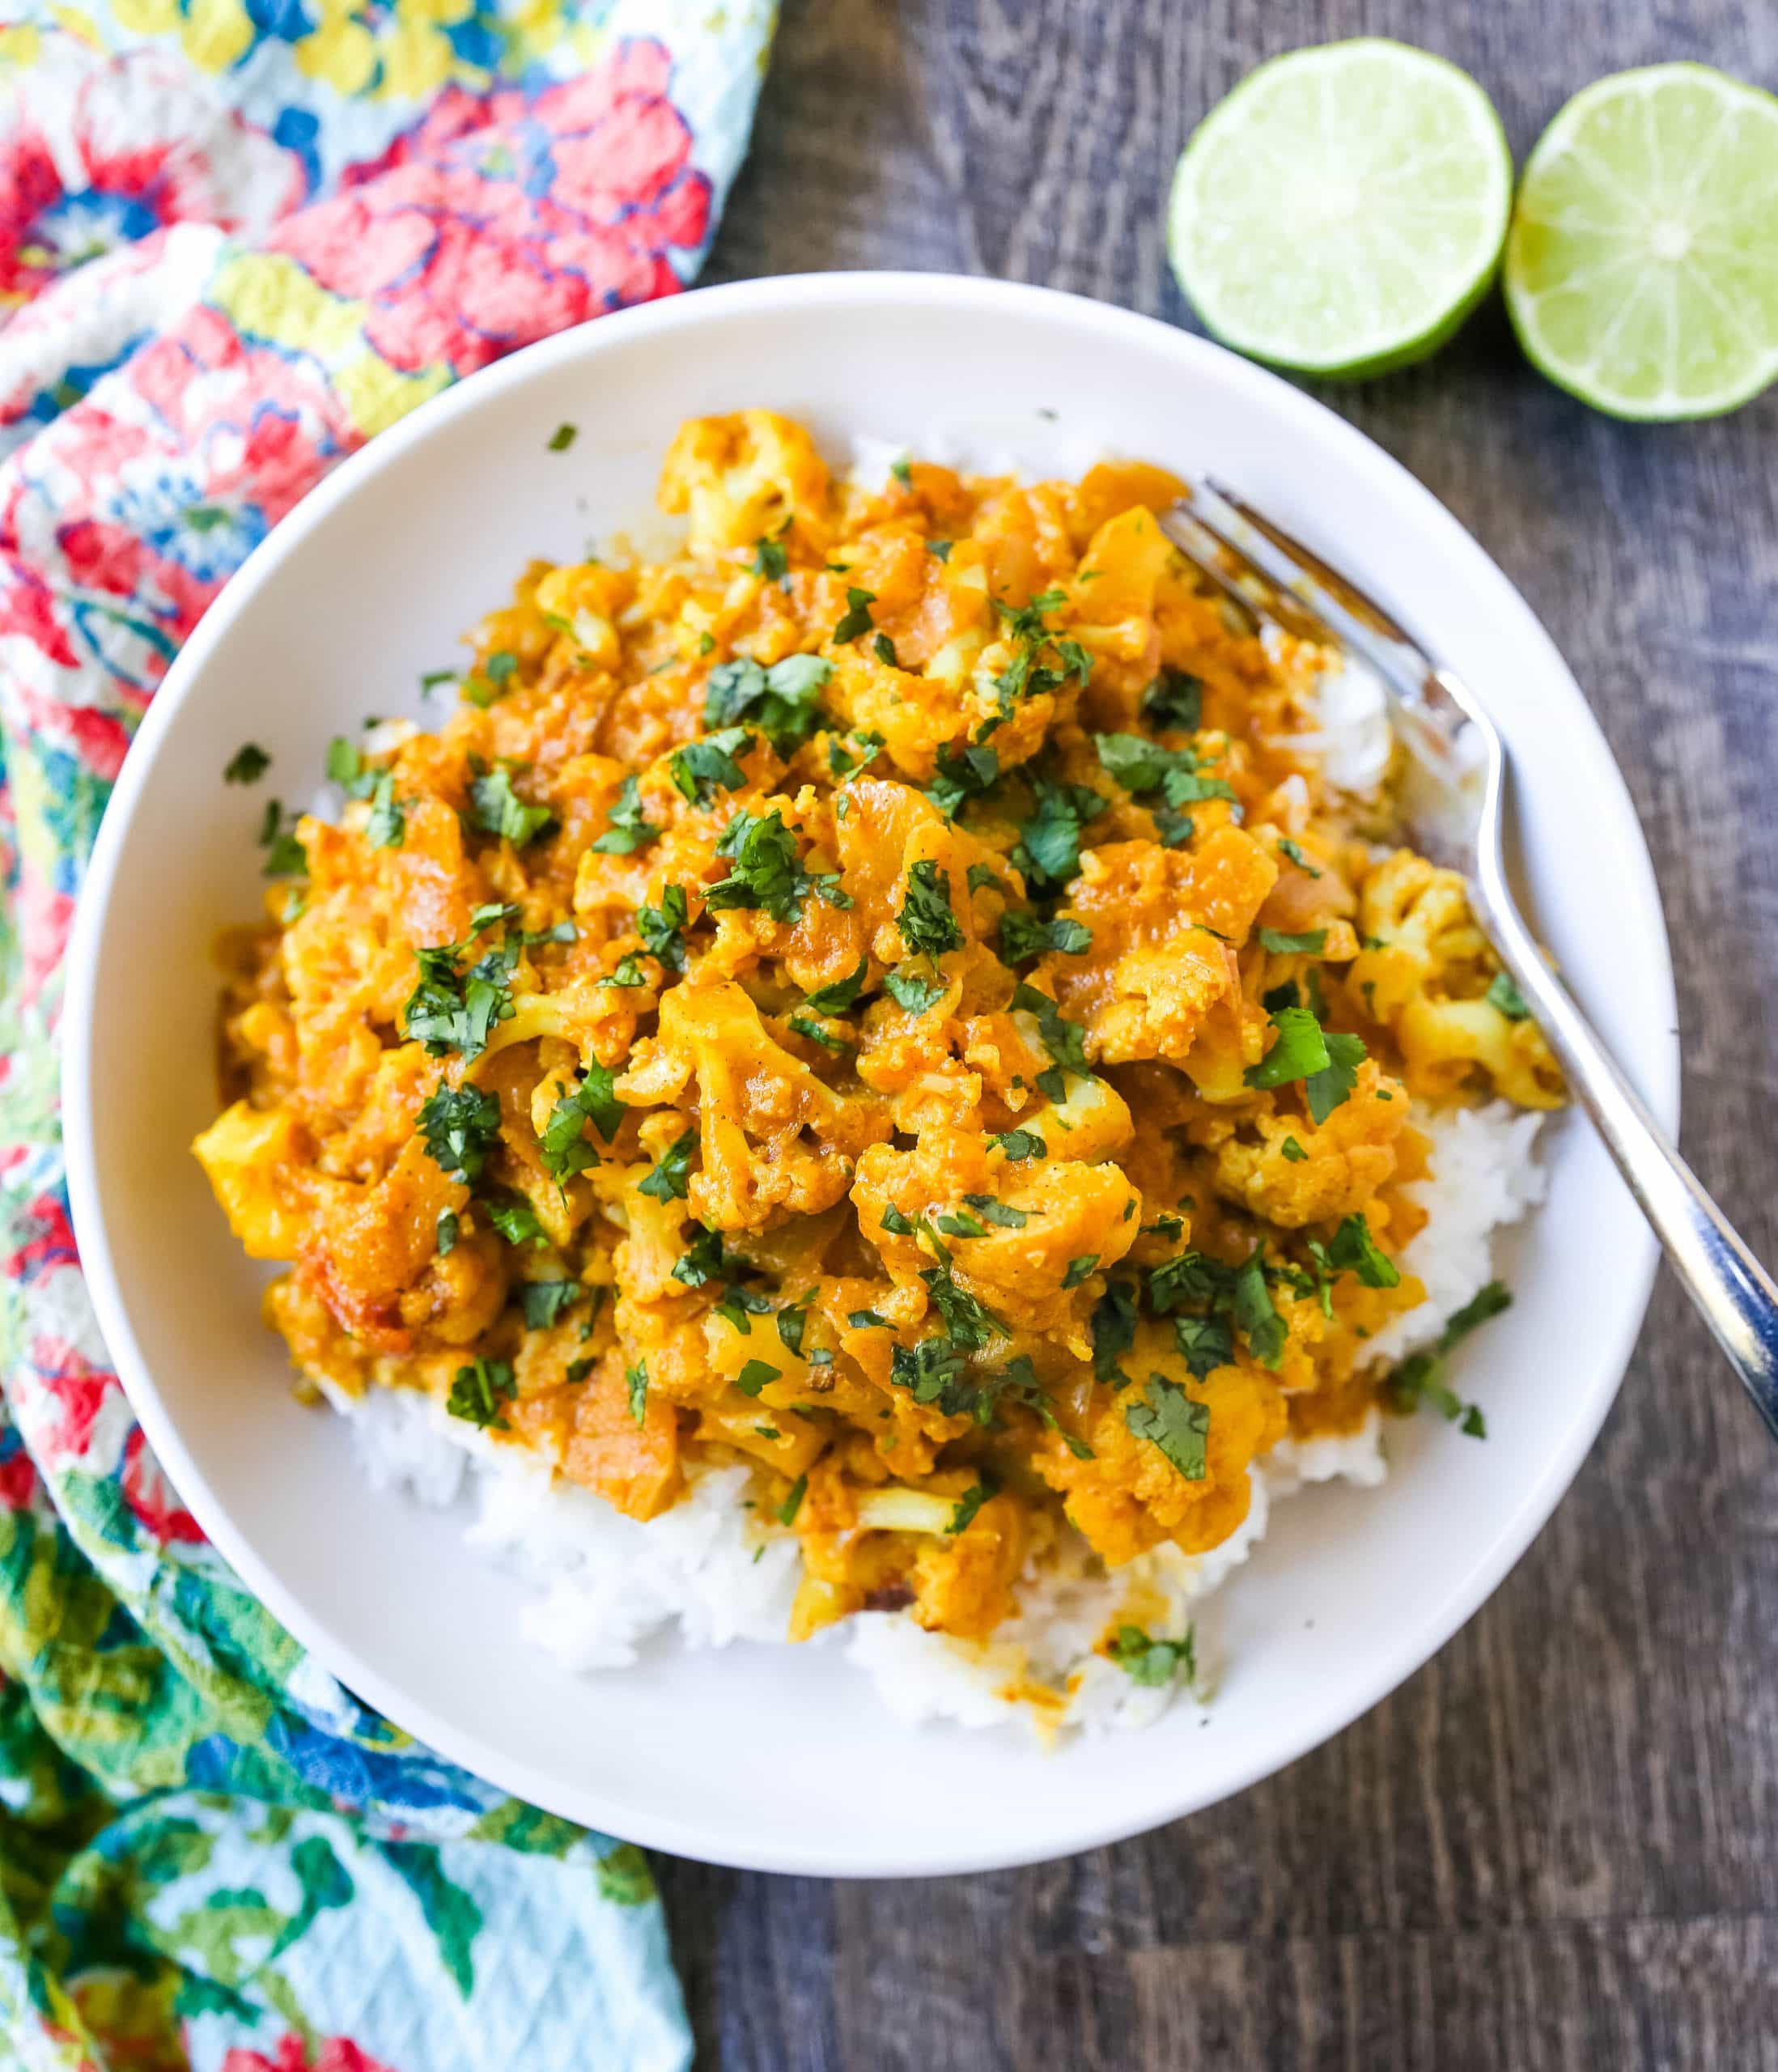 Coconut Cauliflower Curry A rich coconut curry broth with onion, garlic, cauliflower, ginger, Indian spices in coconut milk. Flavorful vegan meal and you won’t even miss the meat! www.modernhoney.com #curry #cauliflower #cauliflowercurry #indianfood